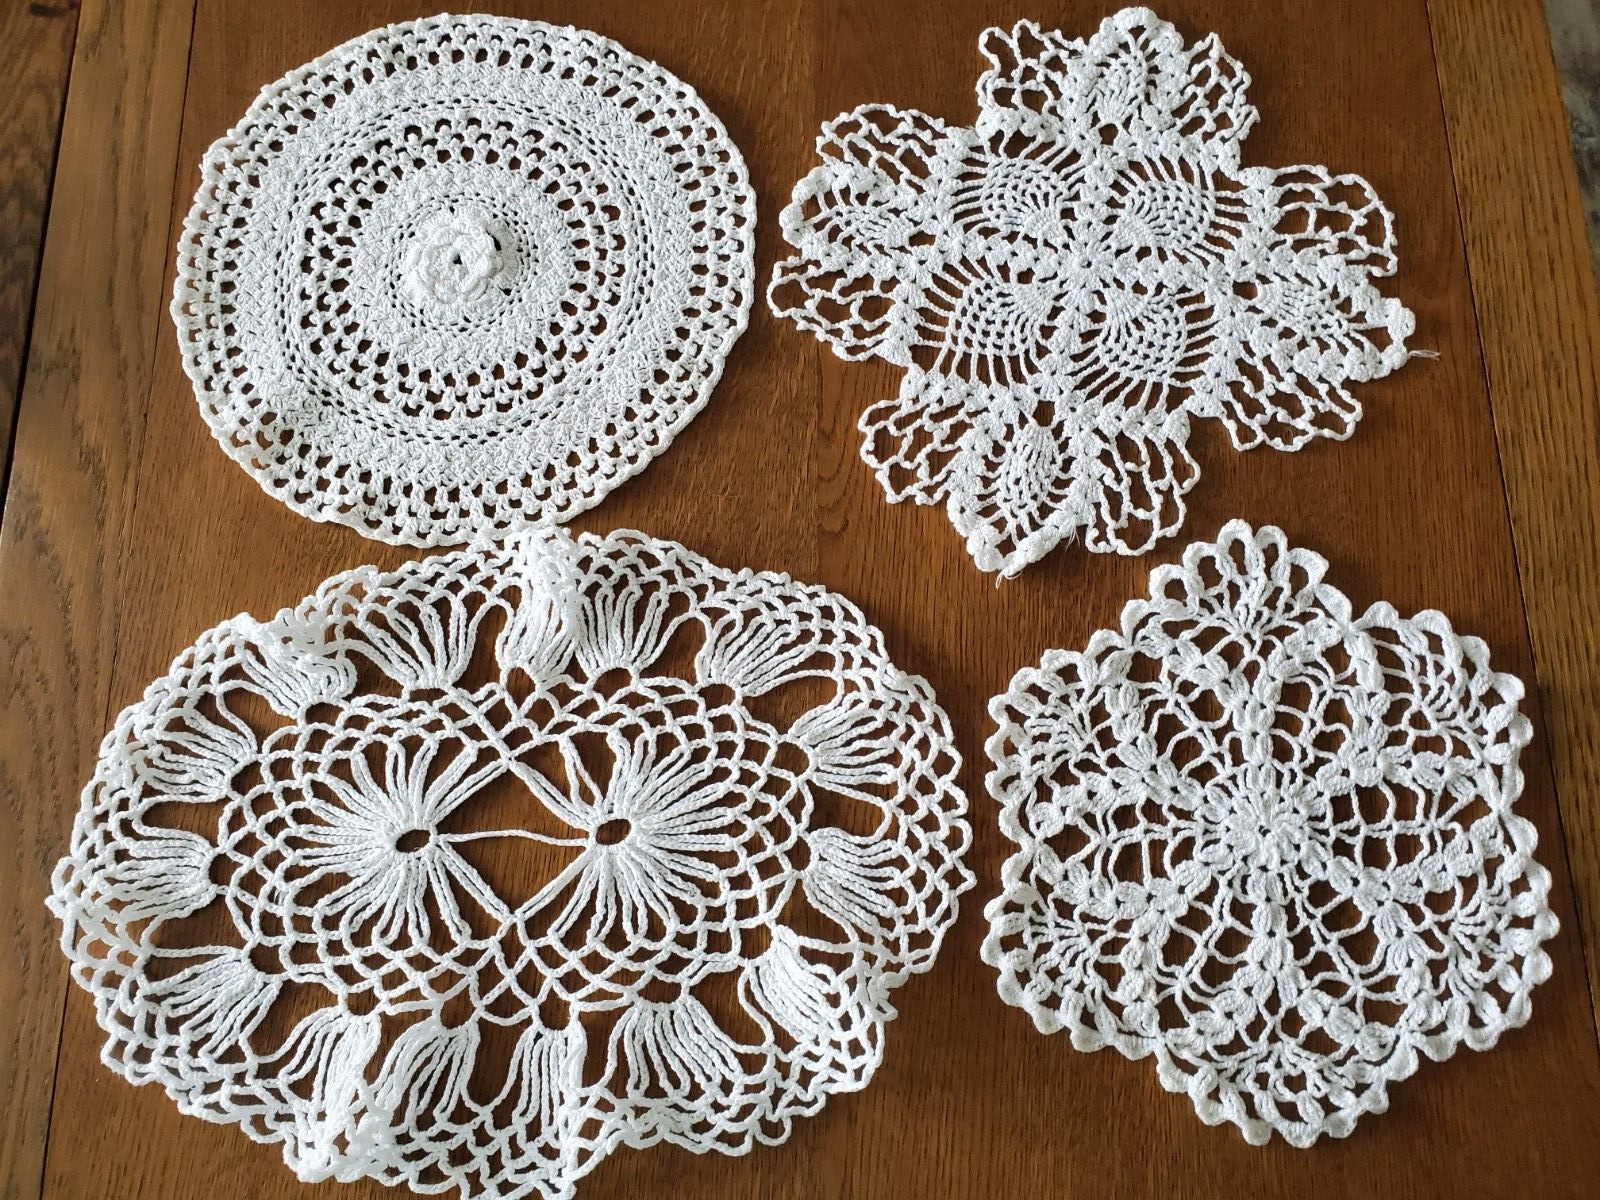 4 Different Vintage White Crochet Doilies Round Oval Raised Pineapple